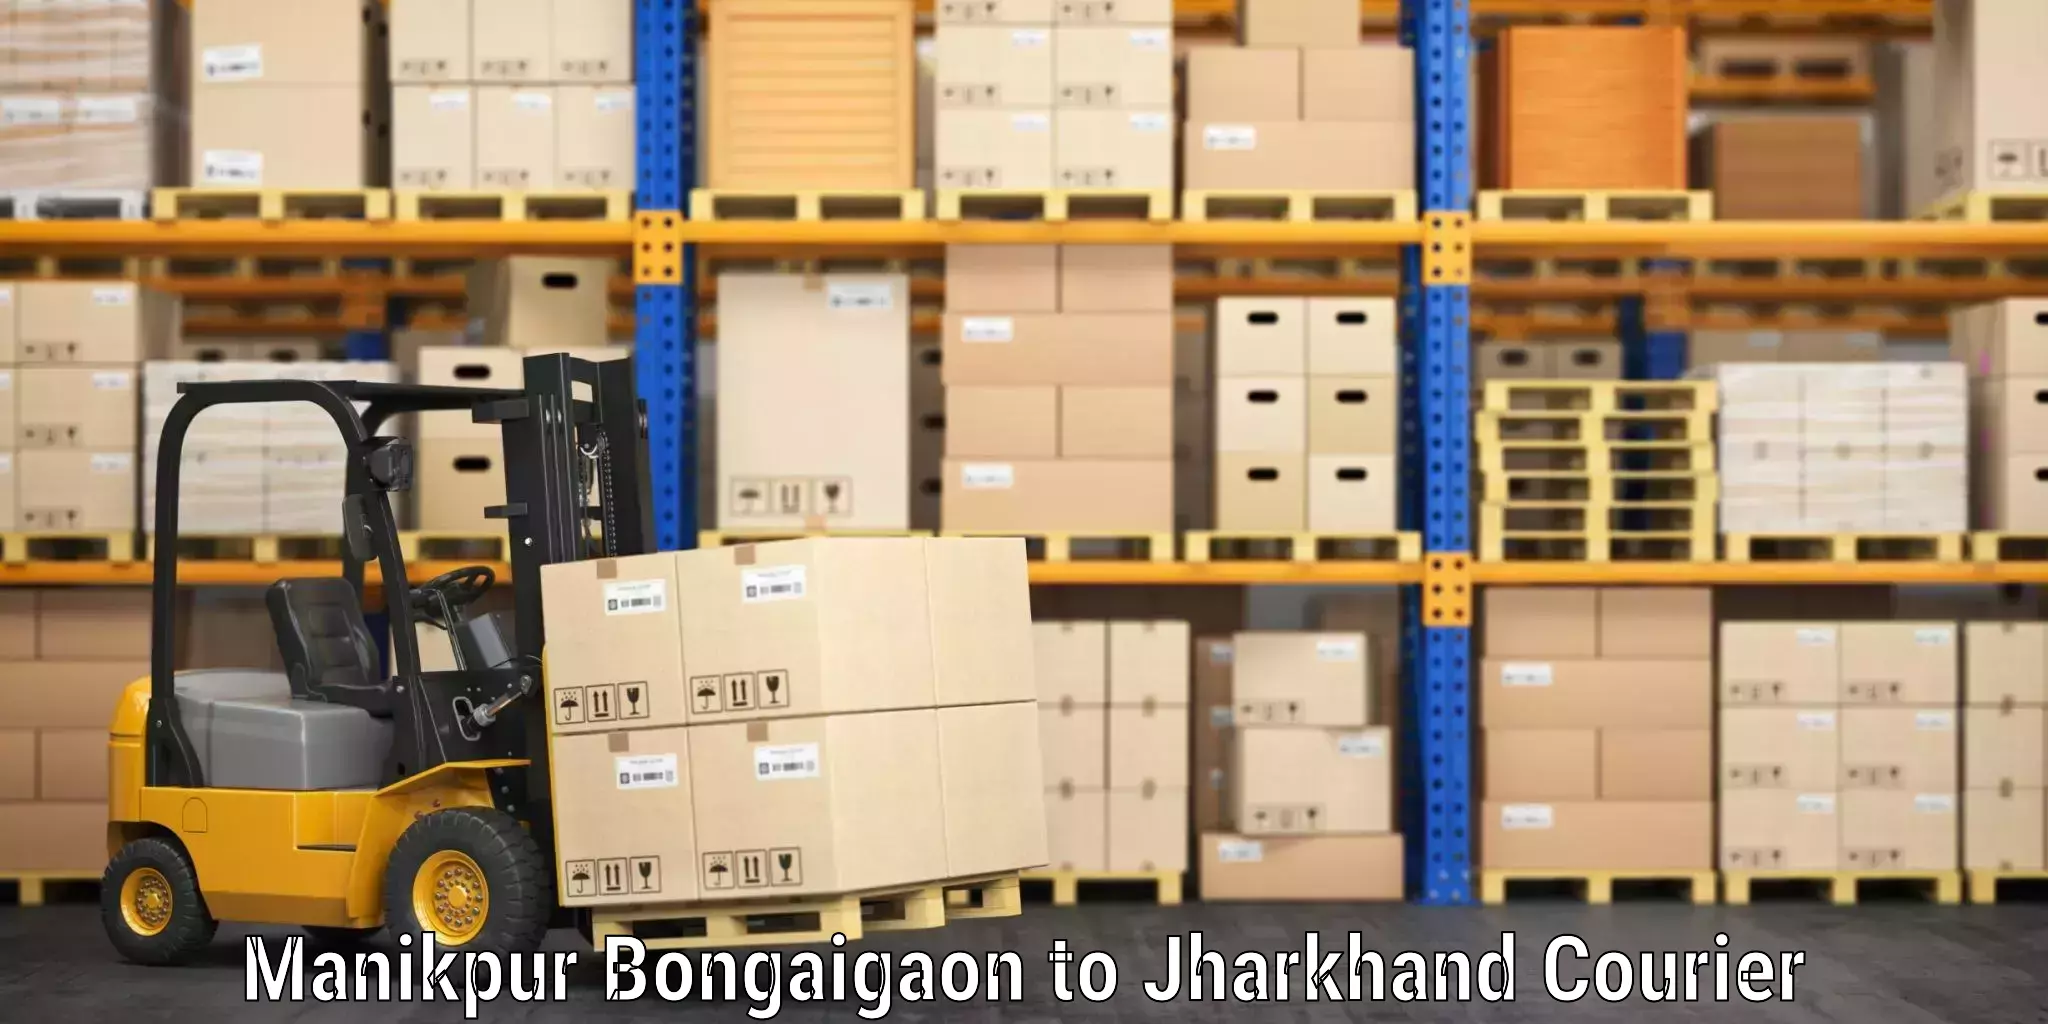 Luggage shipment specialists in Manikpur Bongaigaon to Jharkhand